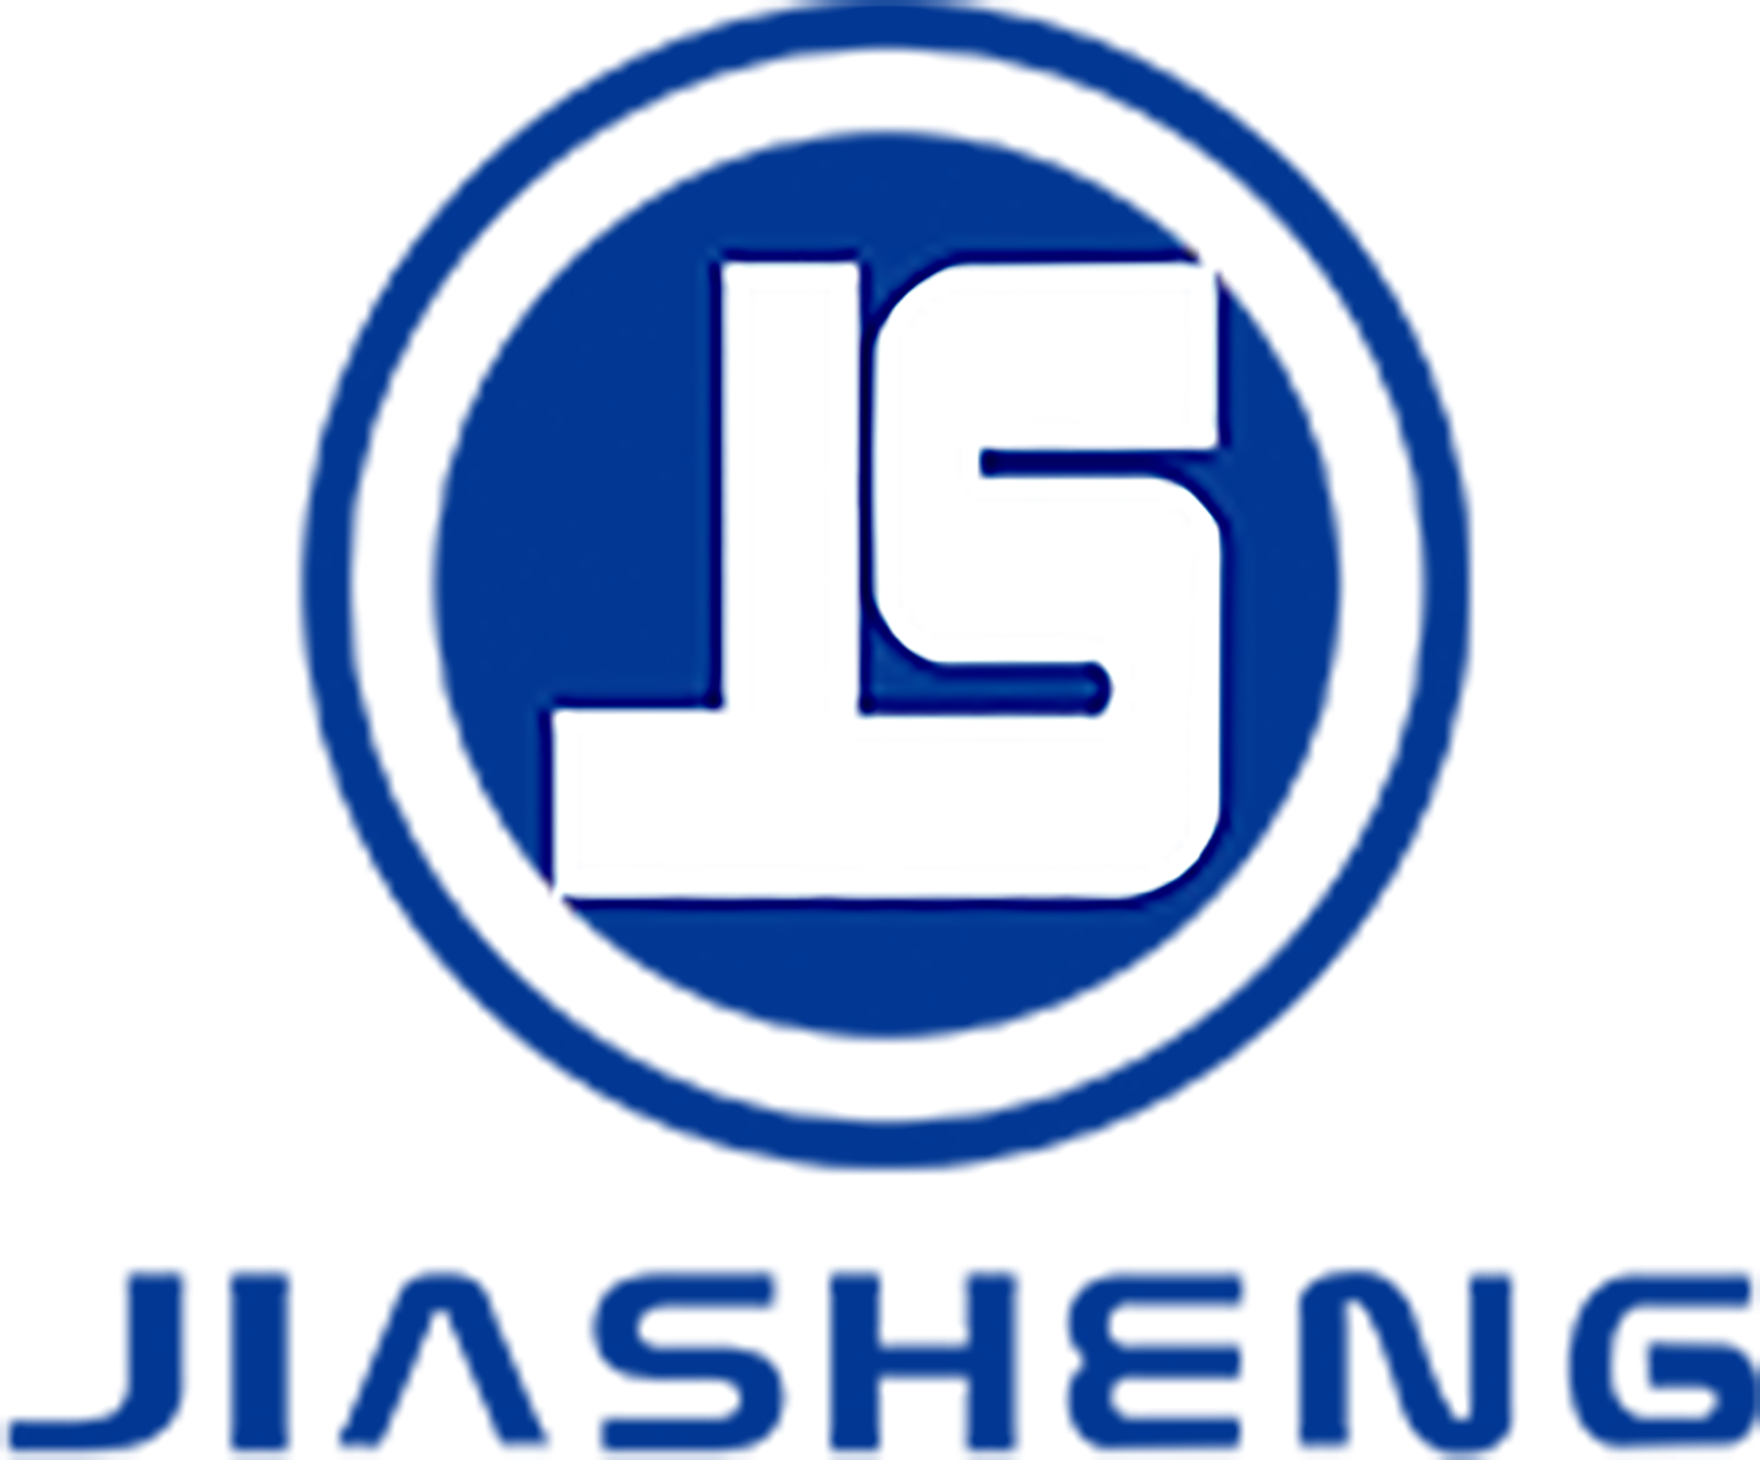 Jiasheng: Leading Plastic Packaging Solutions Manufacturer